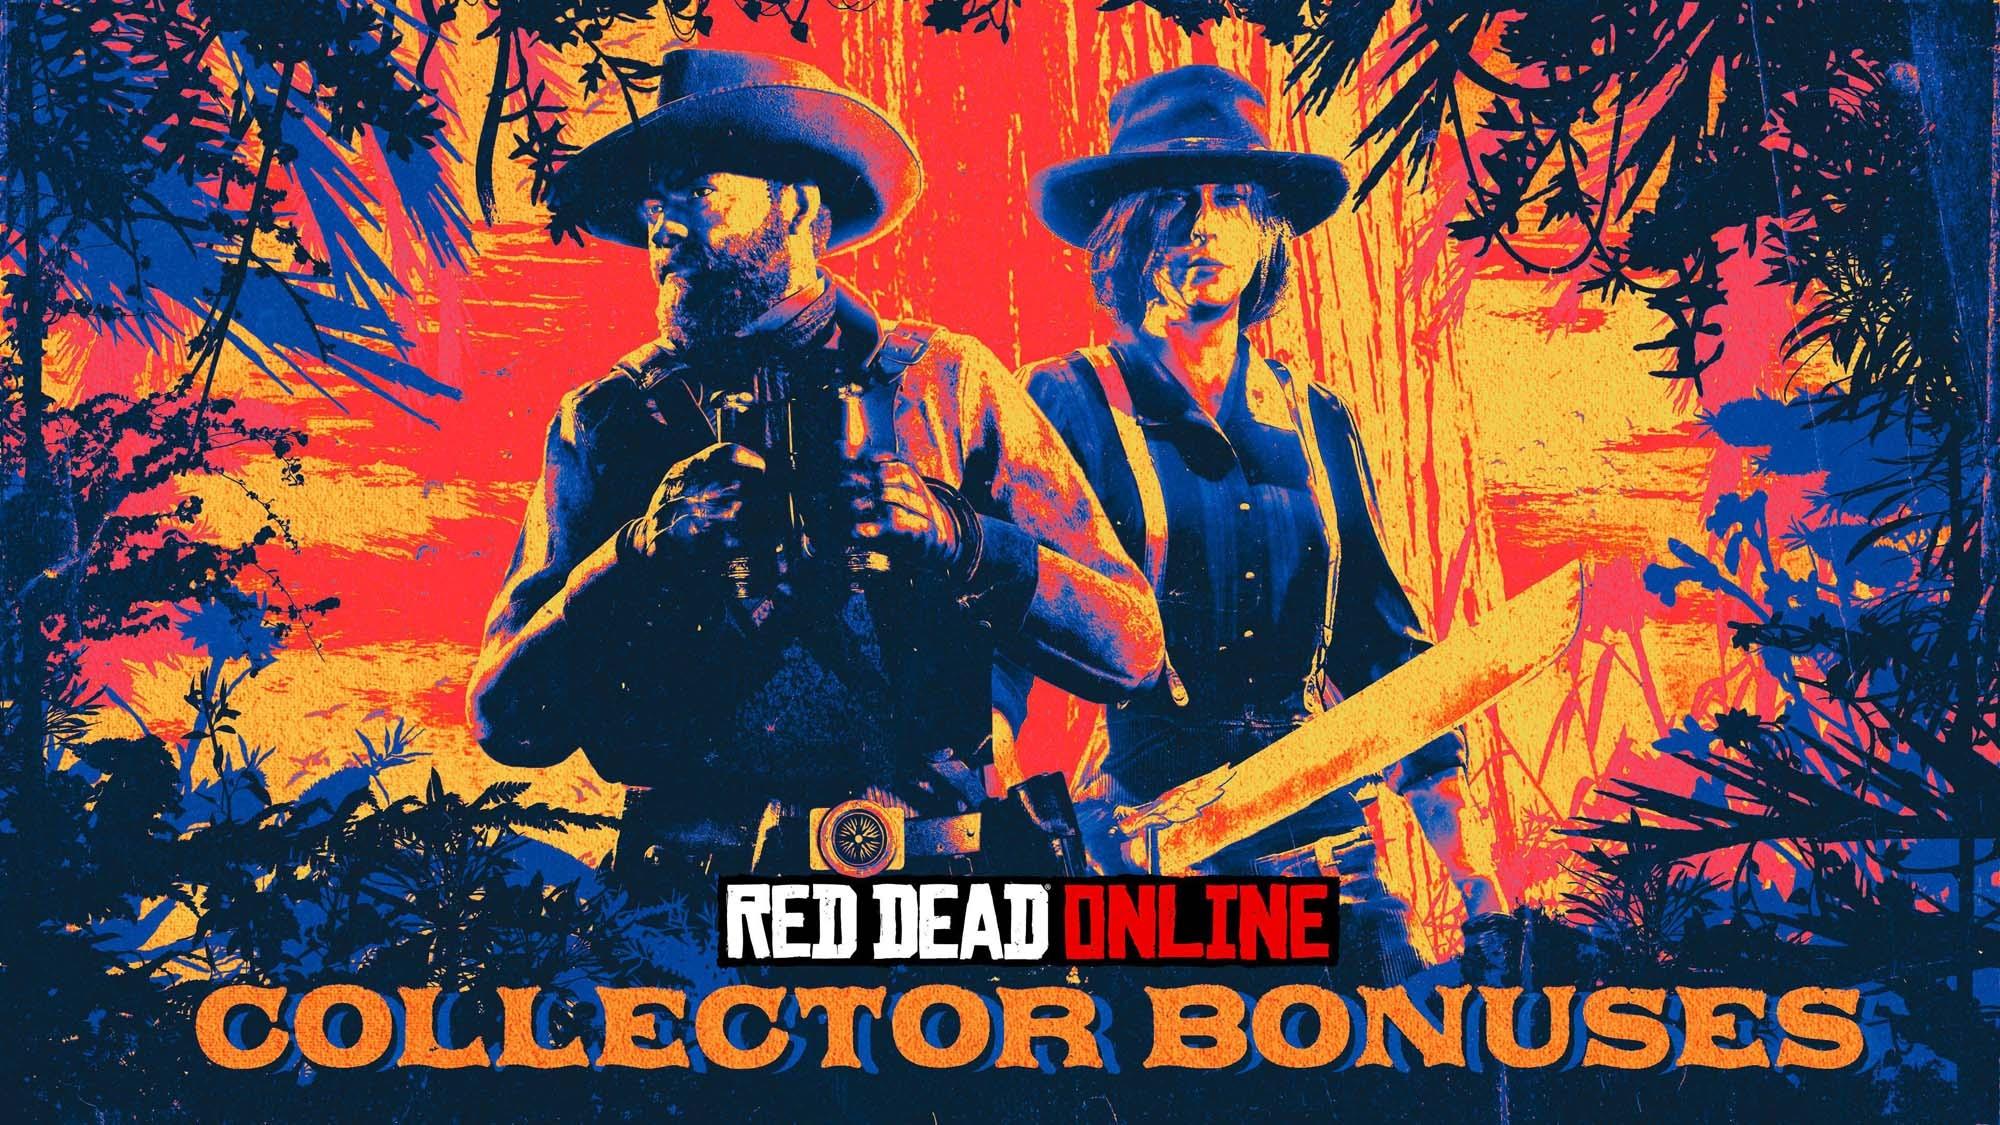 Red Dead Online Bonuses for Collectors, New Community Outfit, Blood Money Bonuses &amp; more